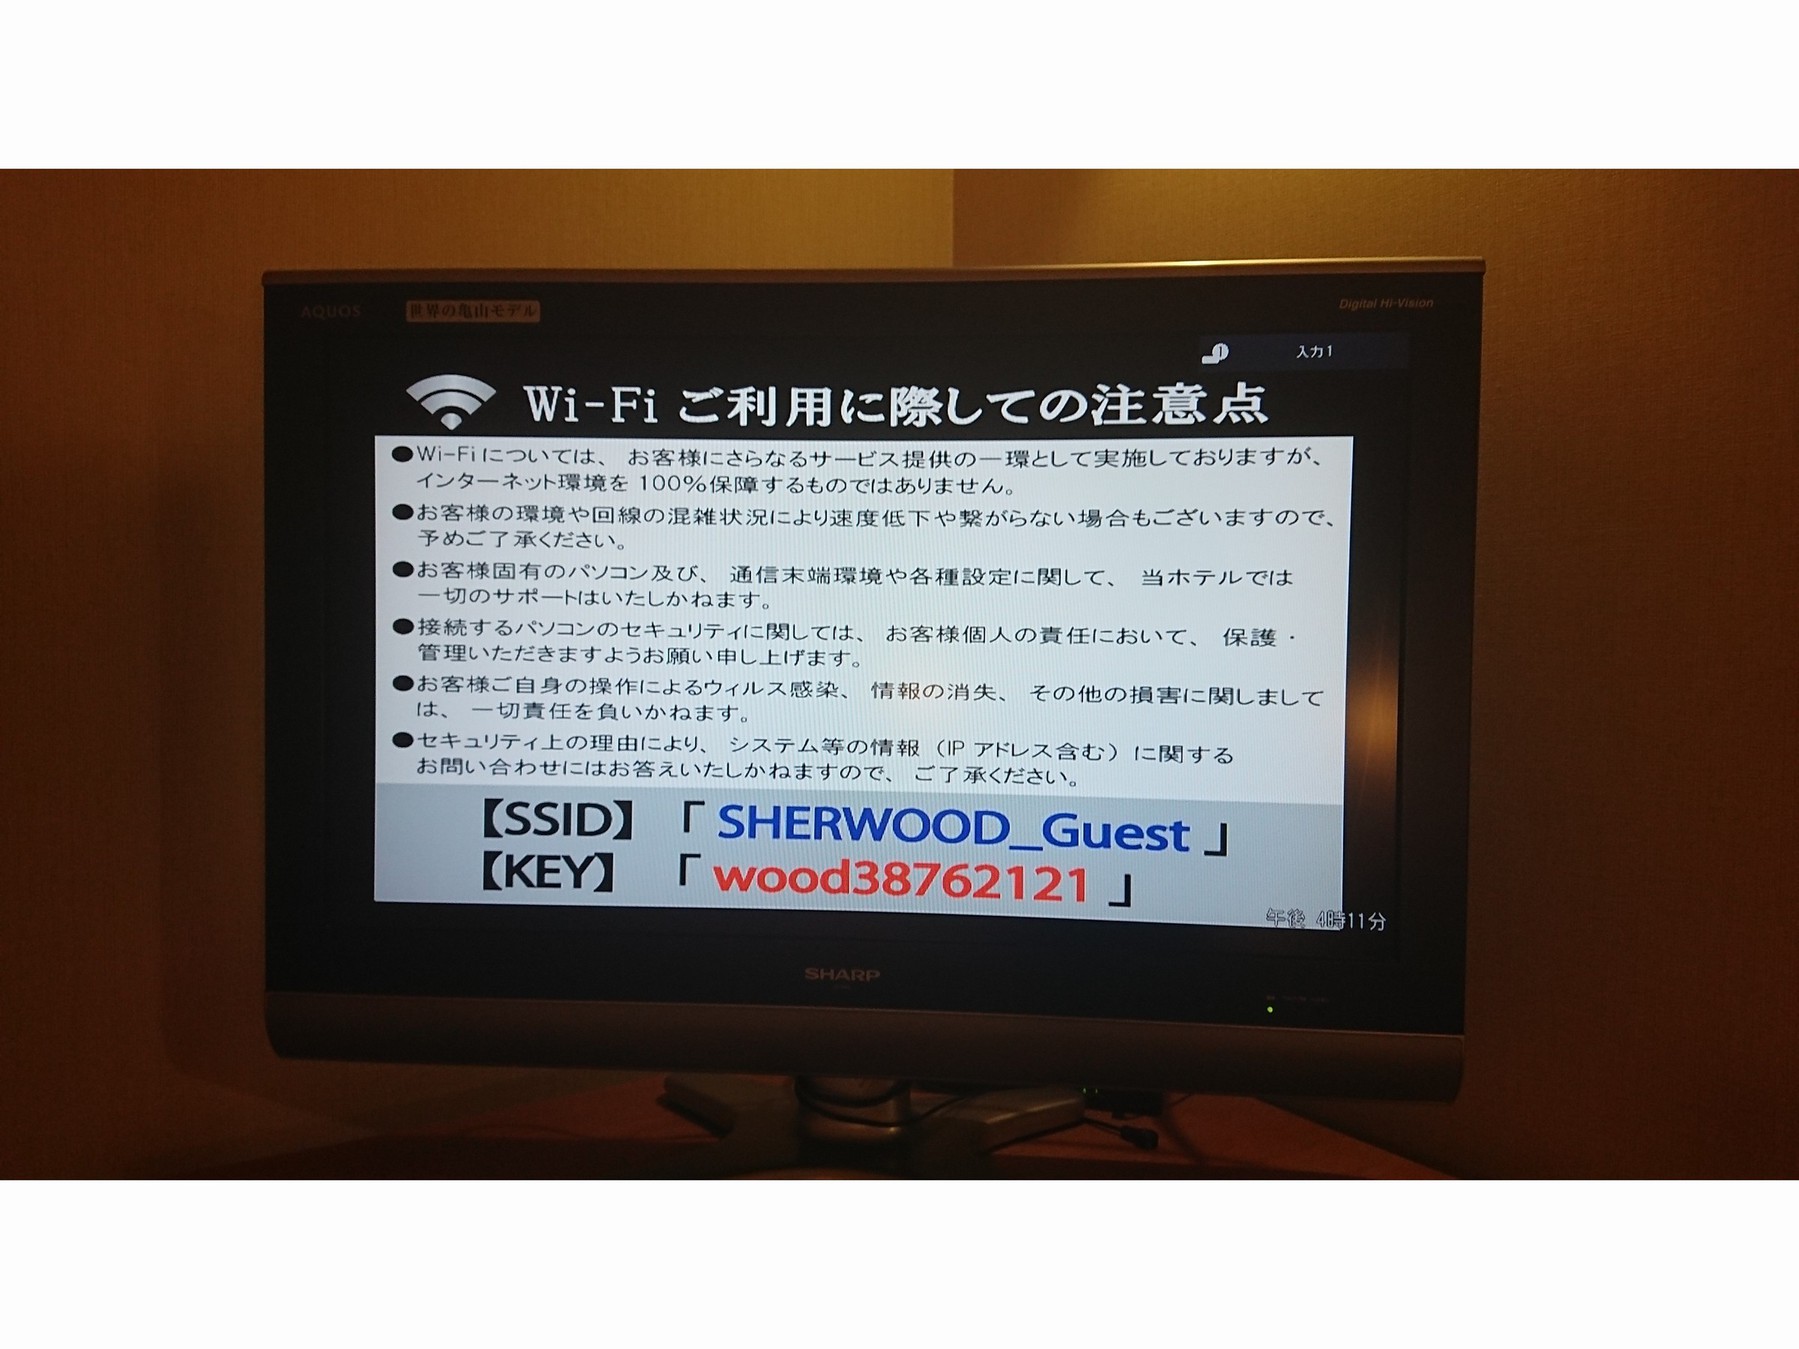 Hotel Sherwood Hotel Sherwood is conveniently located in the popular Ueno area. The property offers guests a range of services and amenities designed to provide comfort and convenience. Service-minded staff will wel